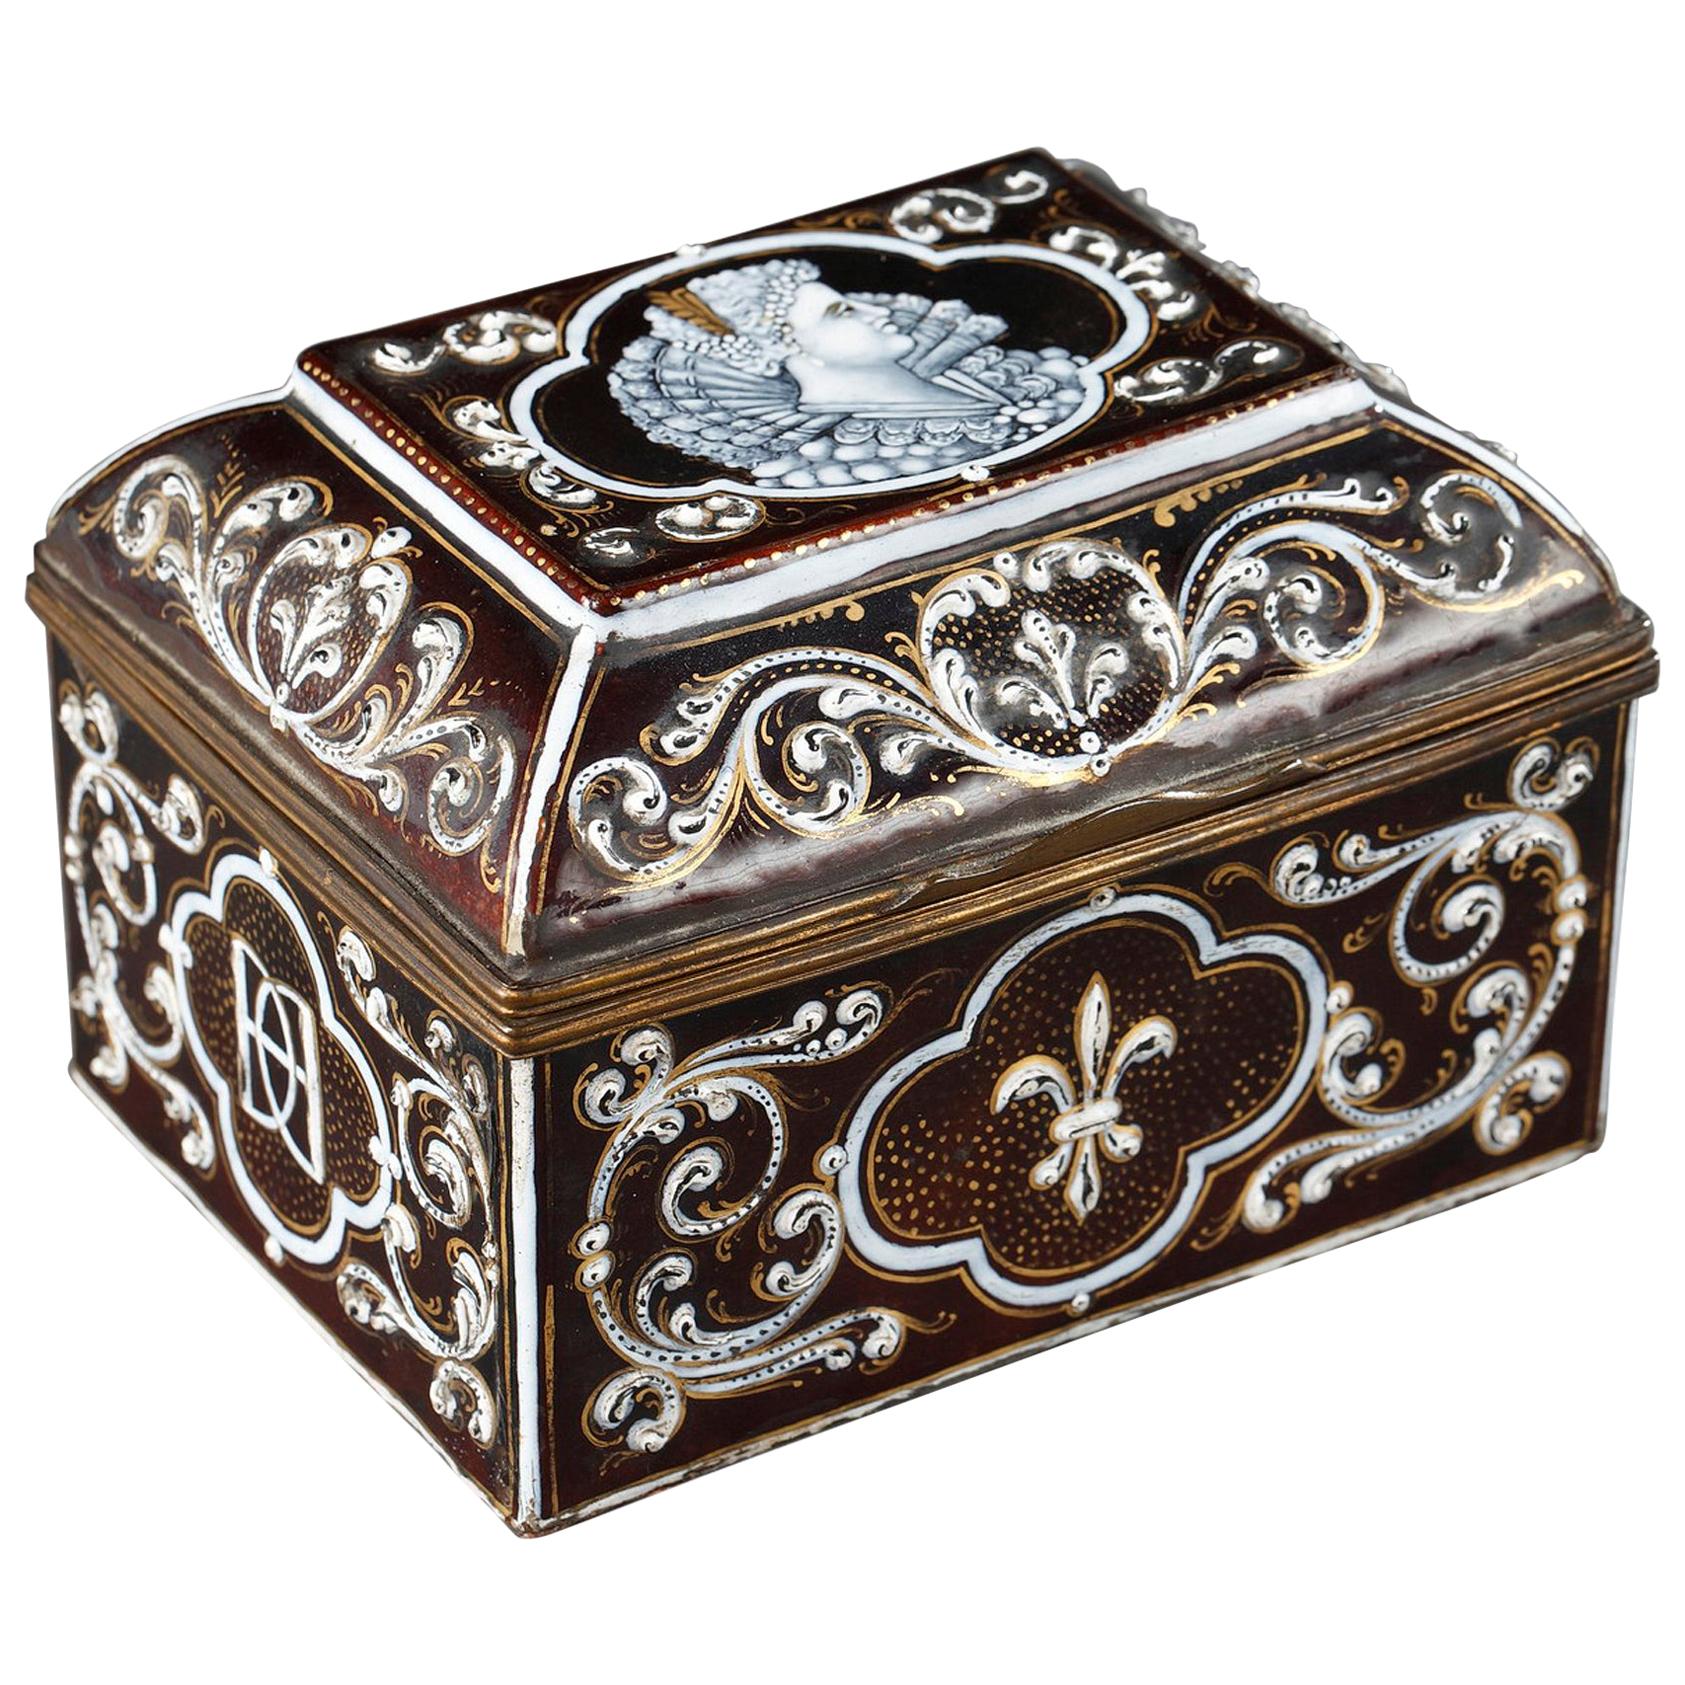 What can I use as a keepsake box?